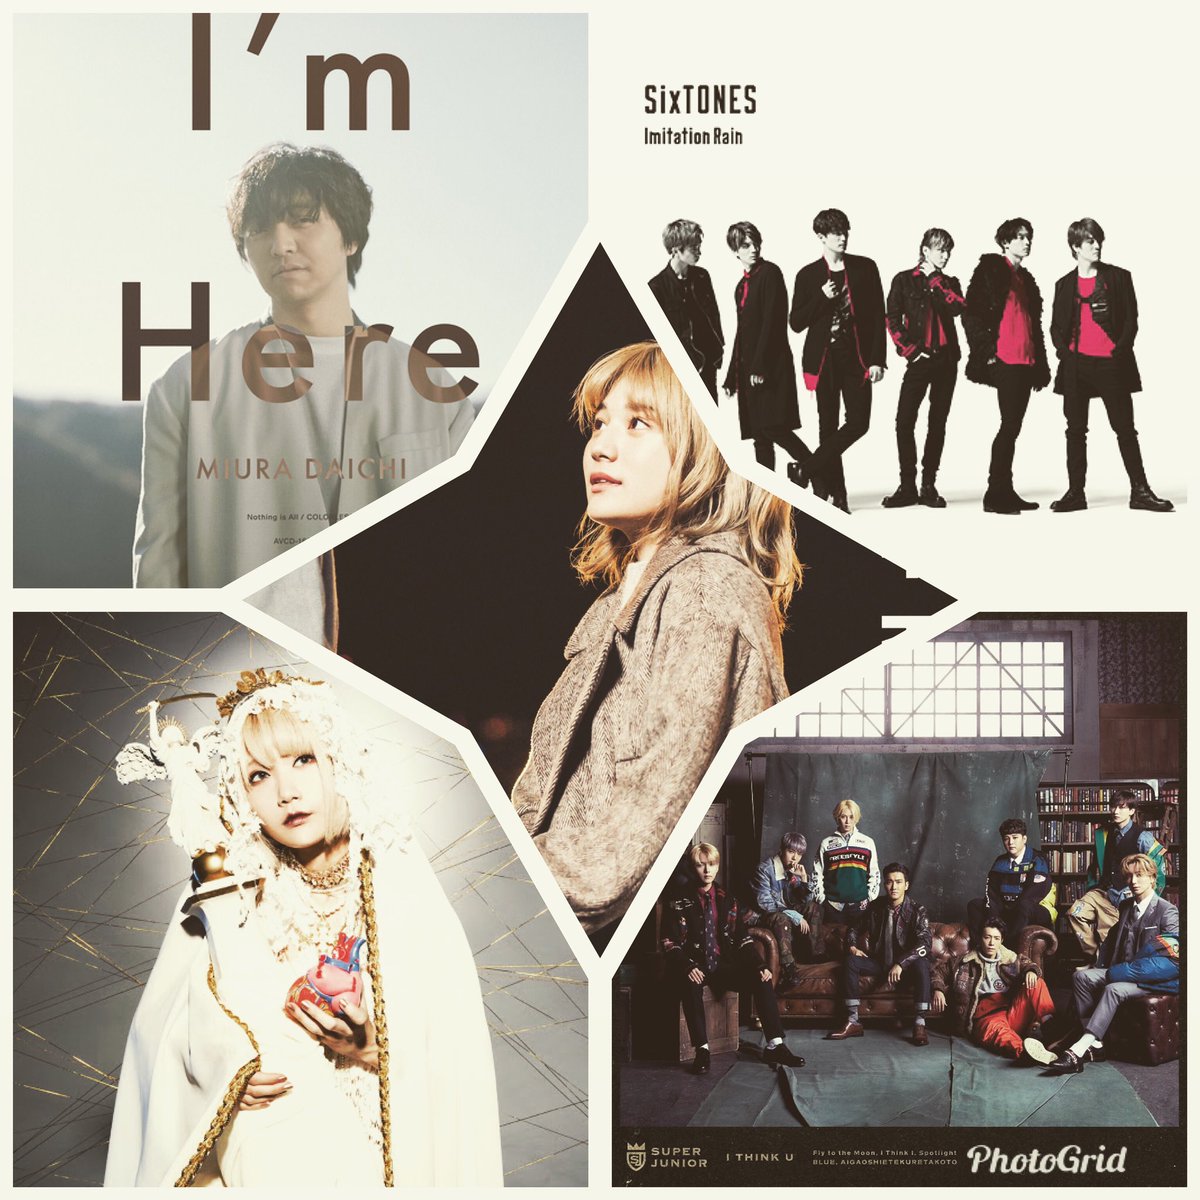 FRIDAY  #MiniplaylistHave not done a full  #jpop one in awhile and since that seems to be what I am listening too lately, HERE WE GO! #SIXtones -  #ImitationRain #DaichiMiura -  #ImHere #GIRLFRIEND -  #Soredake #SuperJunior -  #BLUE #Reol -  #HAMEIN  #music  #FridayMiniplaylist